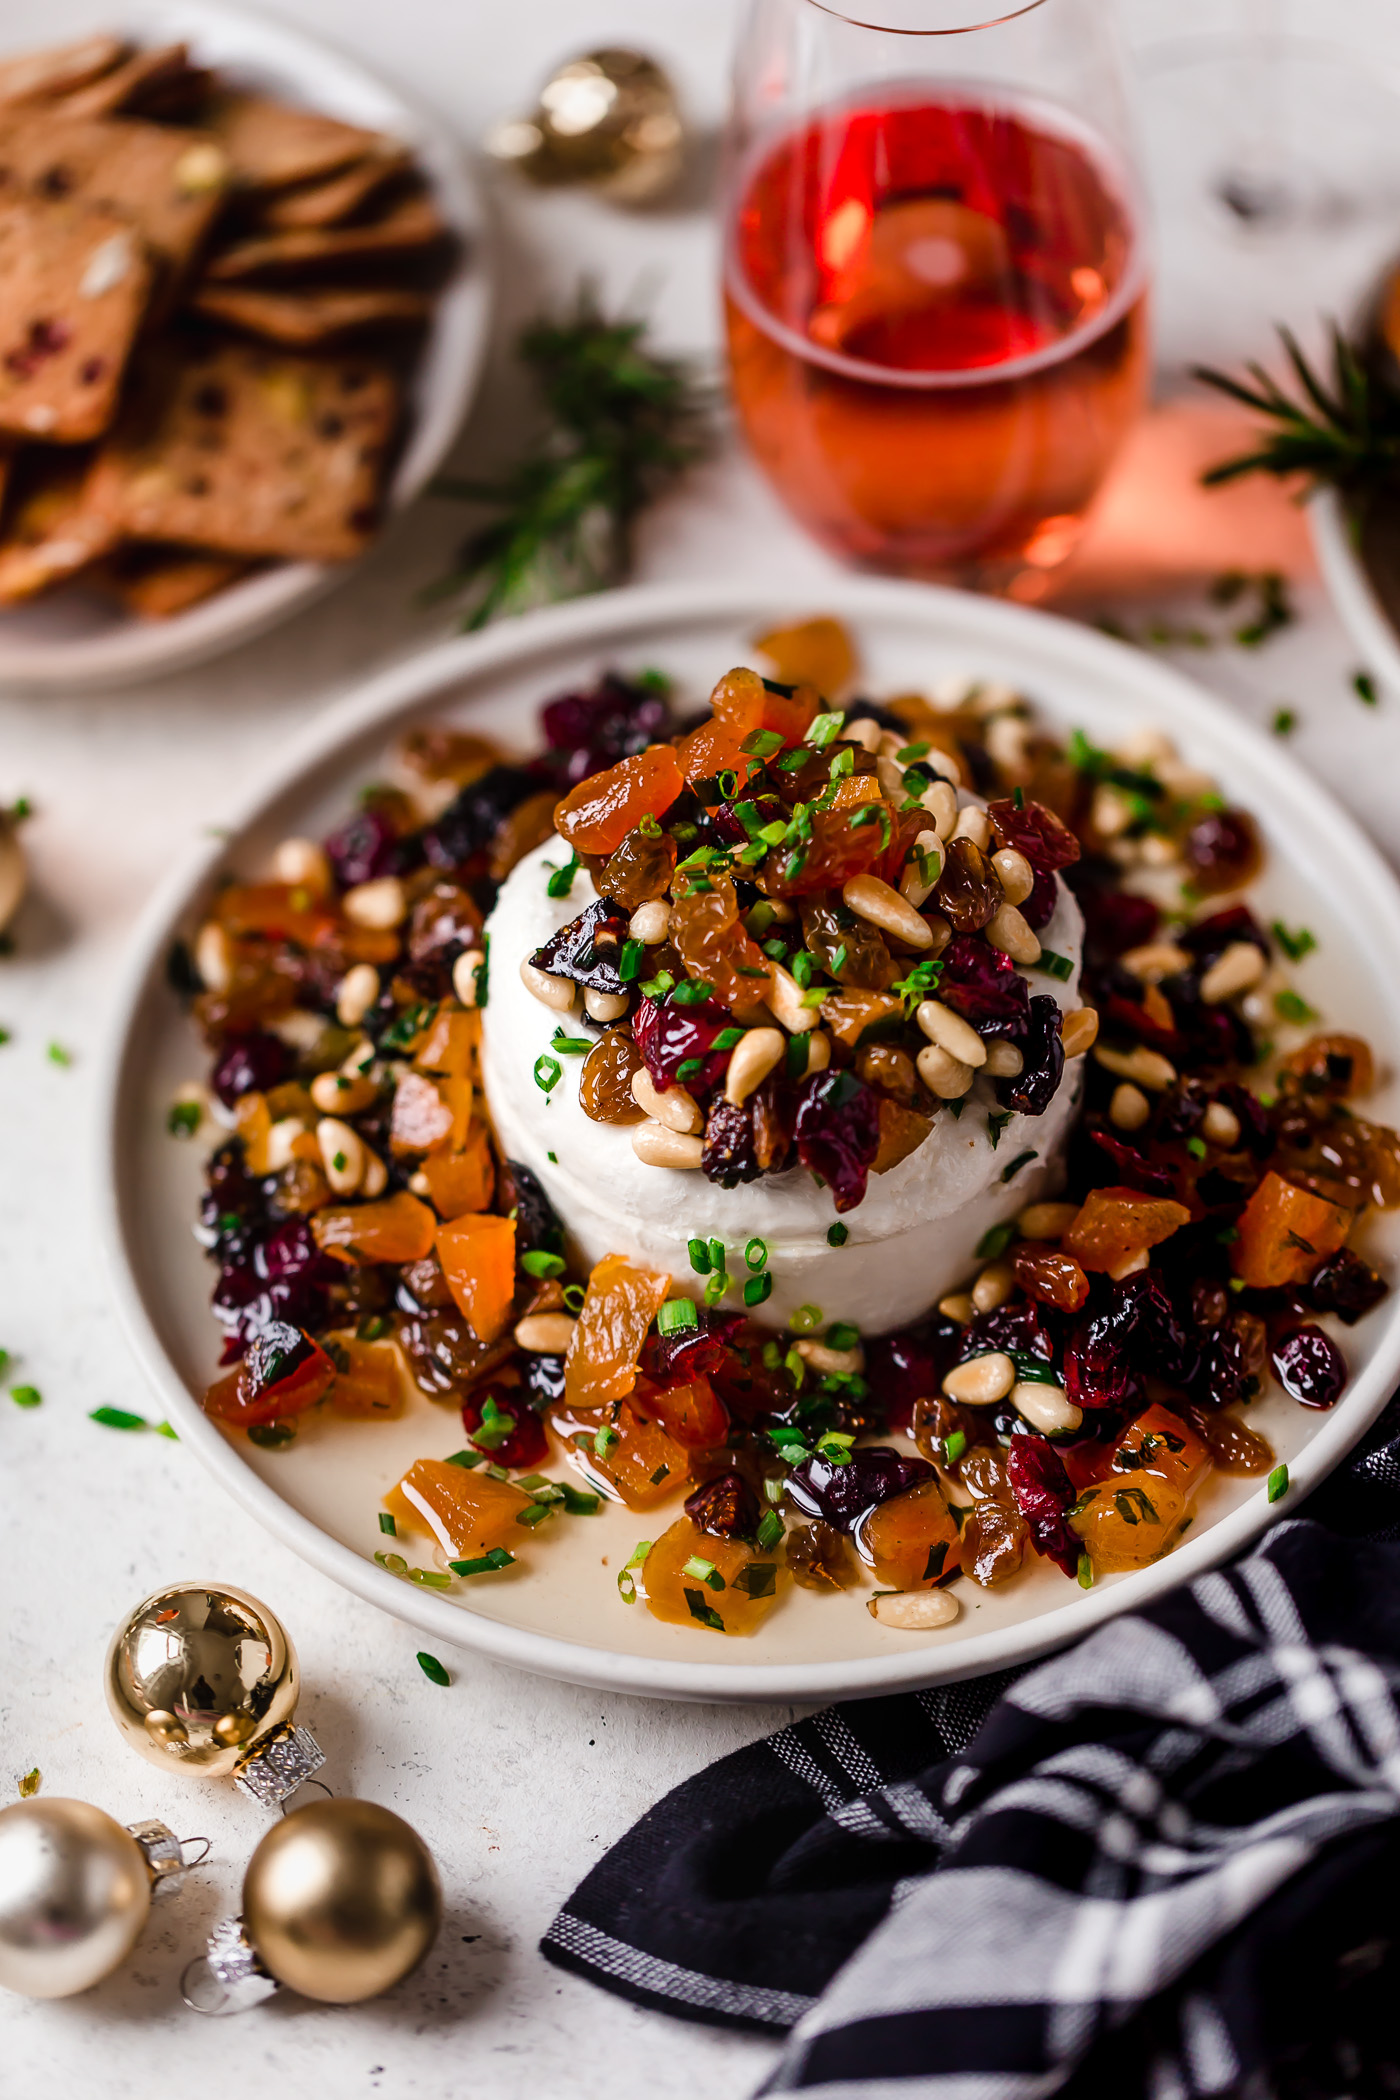 bejeweled holiday marinated goat cheese. easy & beautiful appetizer for any holiday party, this bejeweled holiday marinated goat cheese is always a total show stopper. dried fruits (apricots, golden raisins, figs, cranberries) marinated with fresh herbs & pine nuts, then served over a generous portion of goat cheese. this marinated goat cheese recipe only takes 10 minutes to prep & is always a hit! #playswellwithbutter #marinatedgoatcheese #cheeseball #holidayappetizers #crowdpleaserappetizer